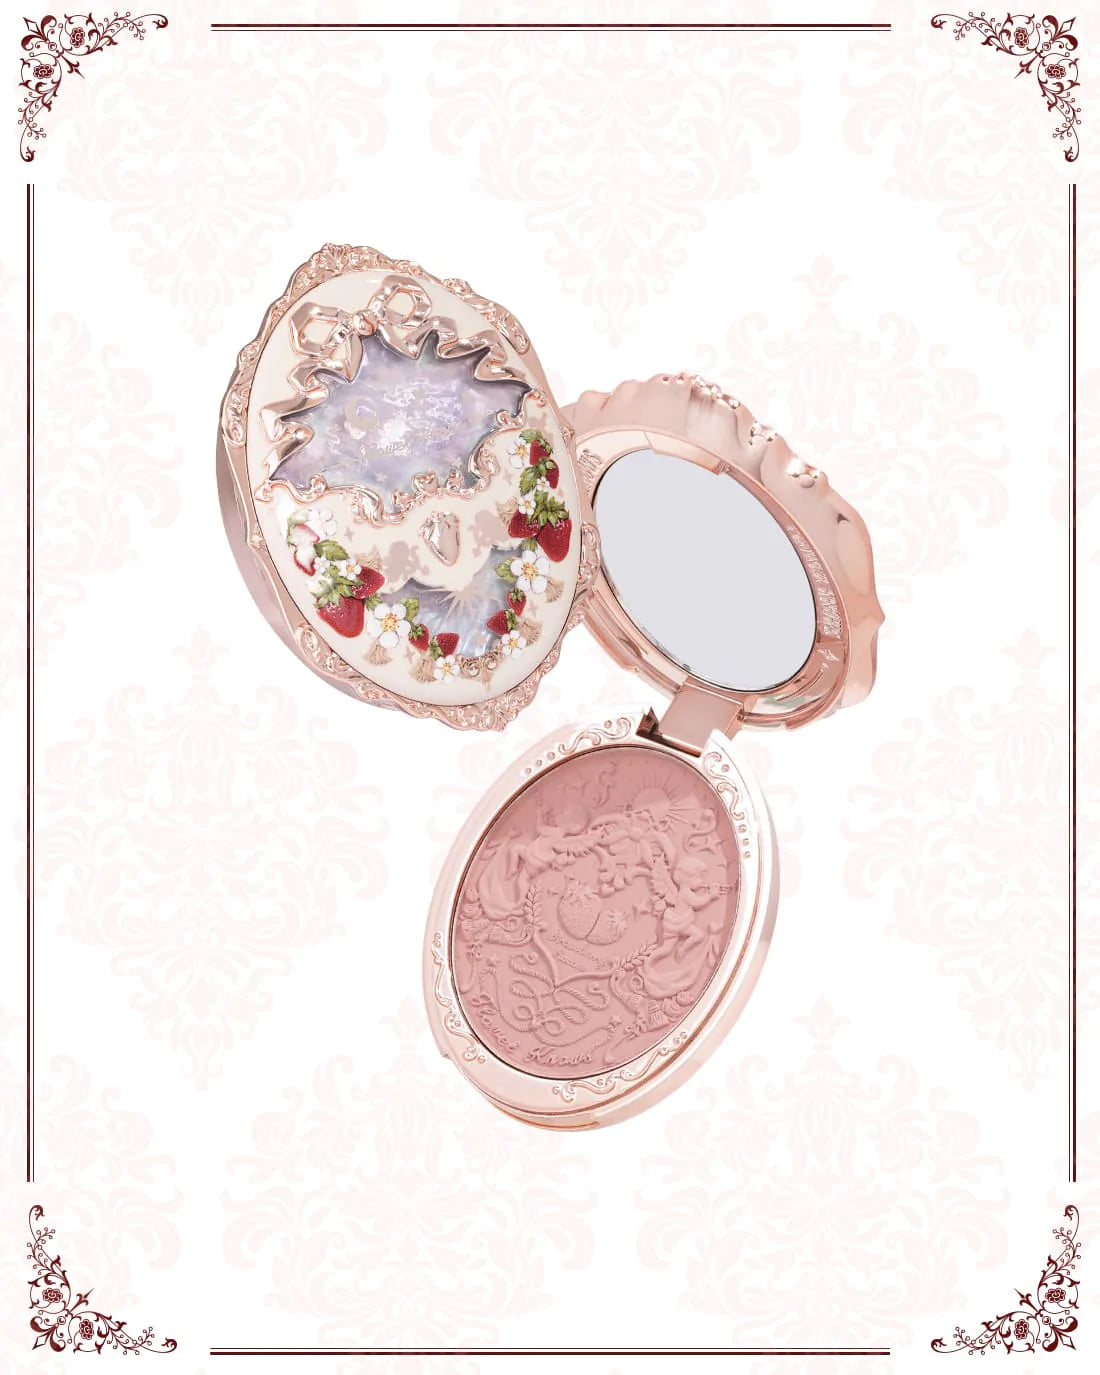 FLOWER KNOWS, STRAWBERRY ROCOCO EMBOSSED BLUSH